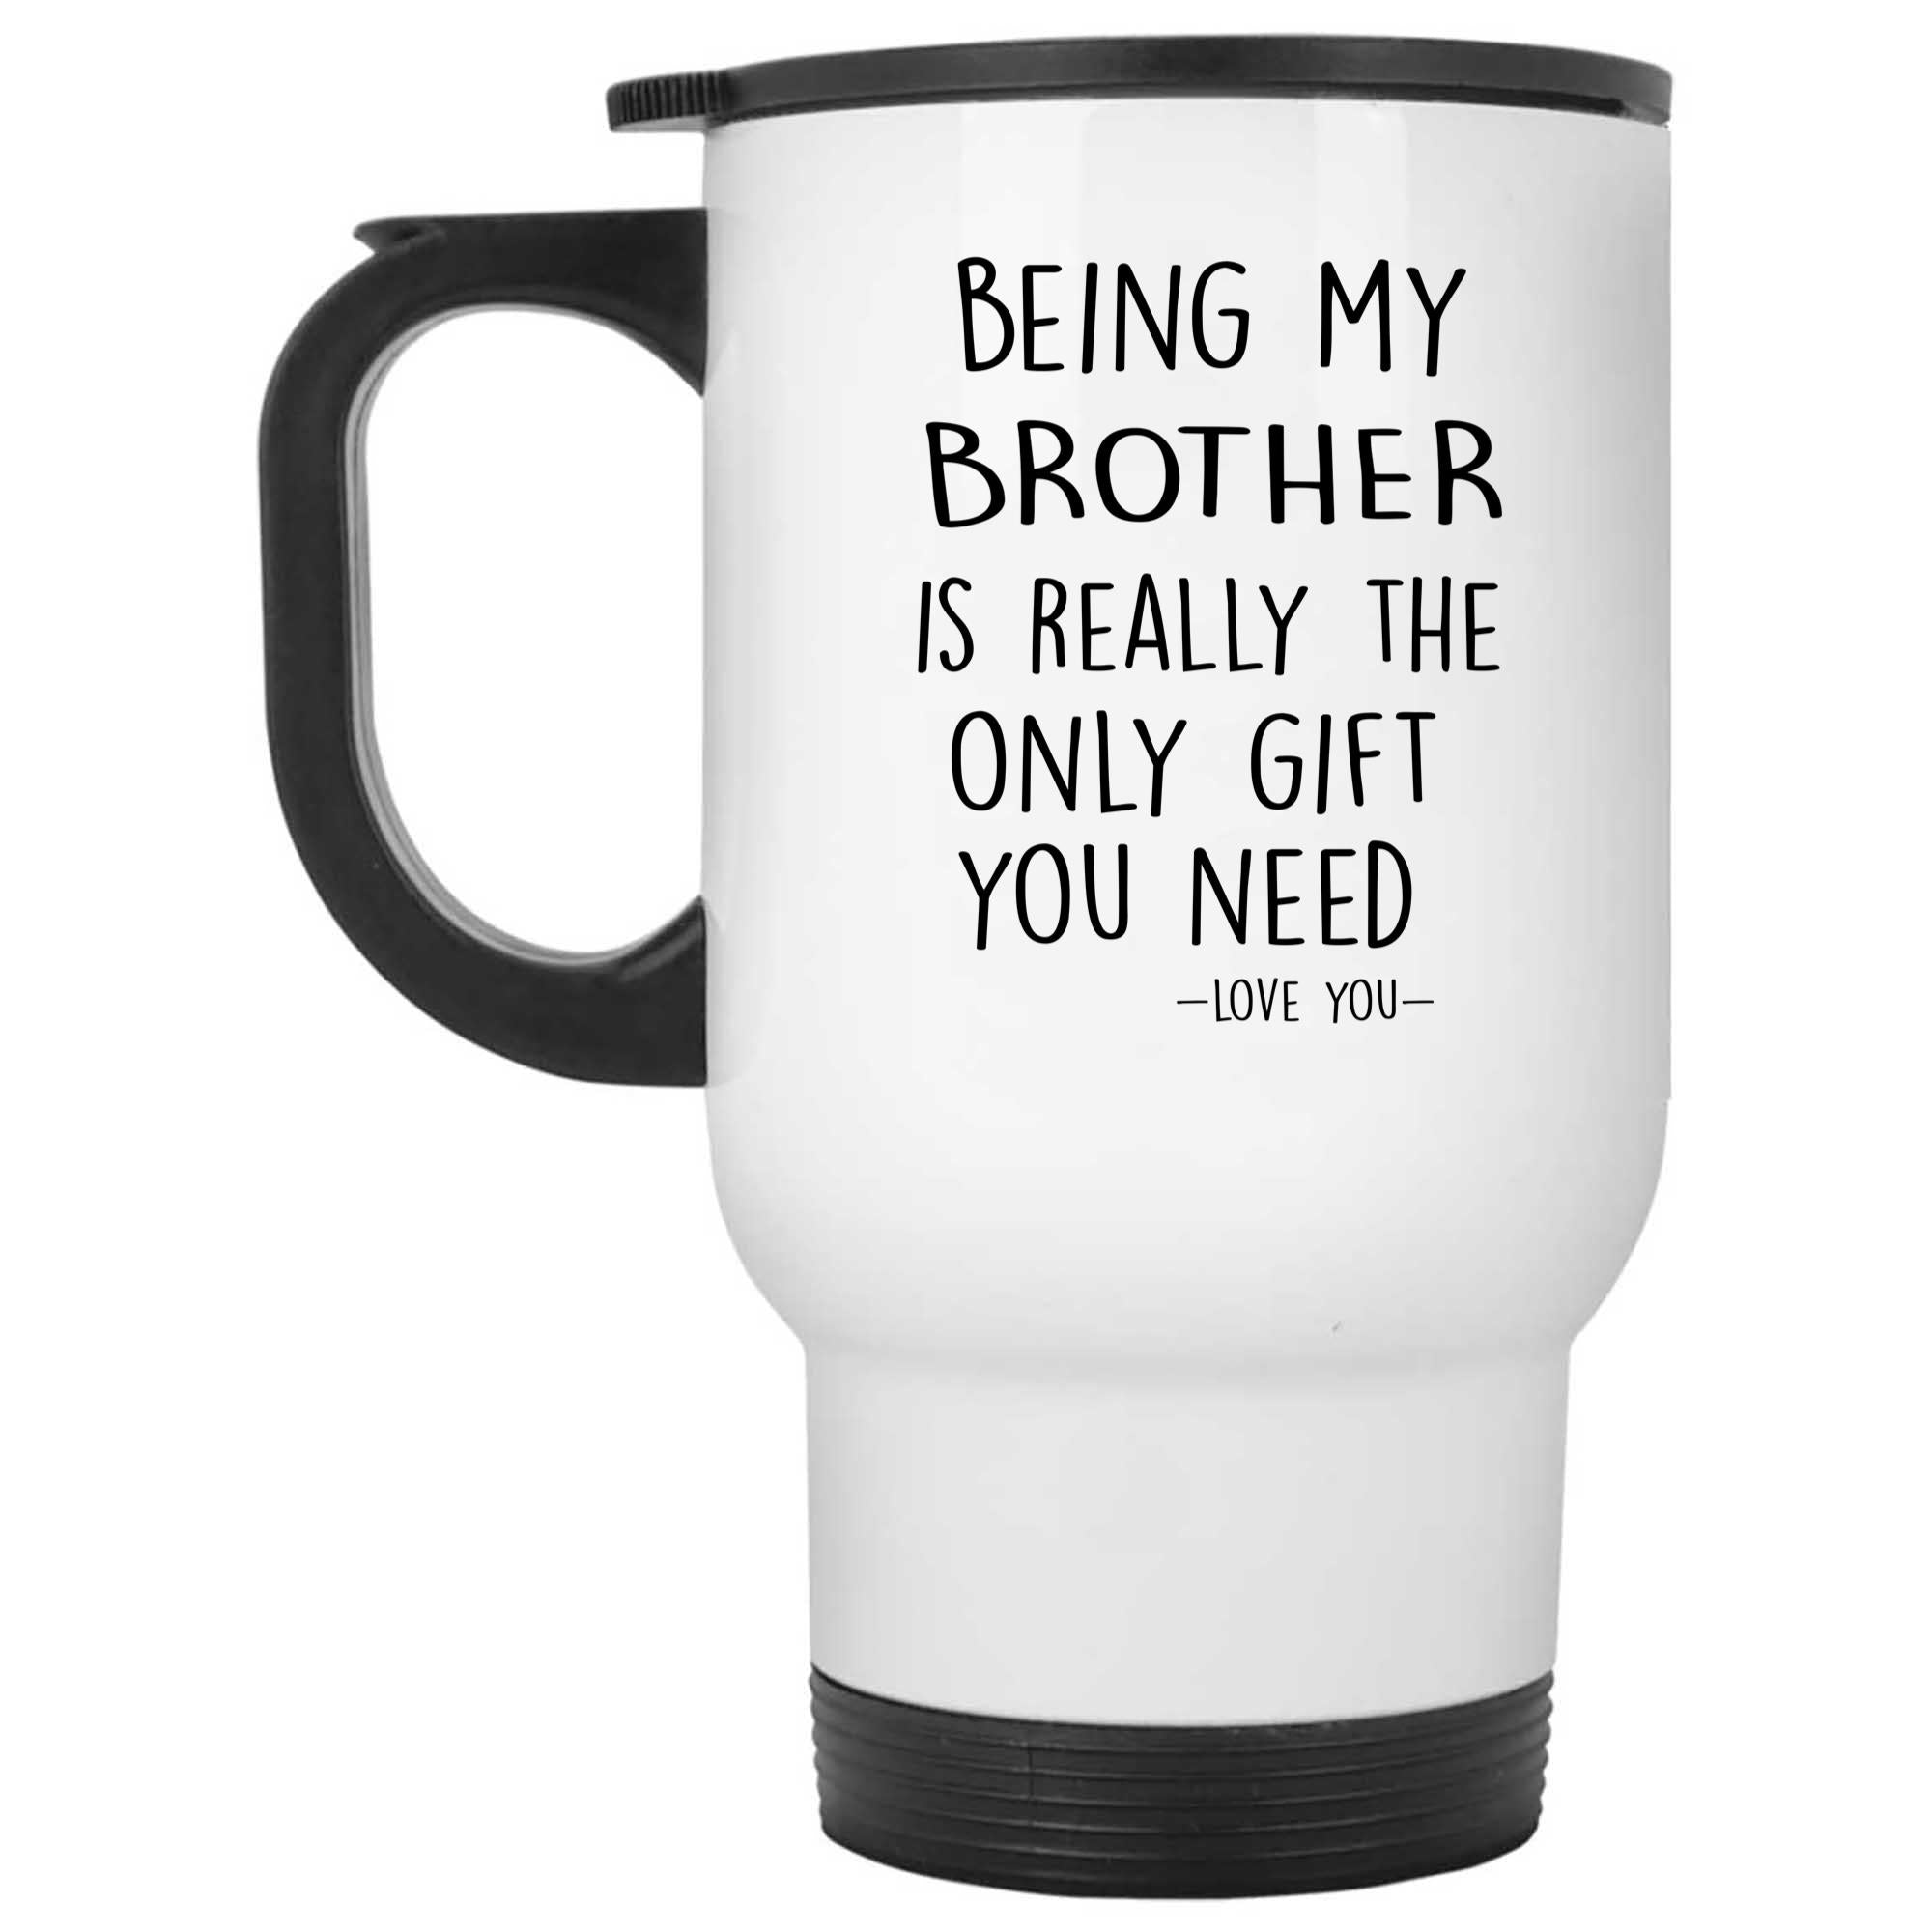 Skitongifts Funny Ceramic Novelty Coffee Mug Being My Brother Is Really The Only You Need  Love You Brother Funny 71papC6